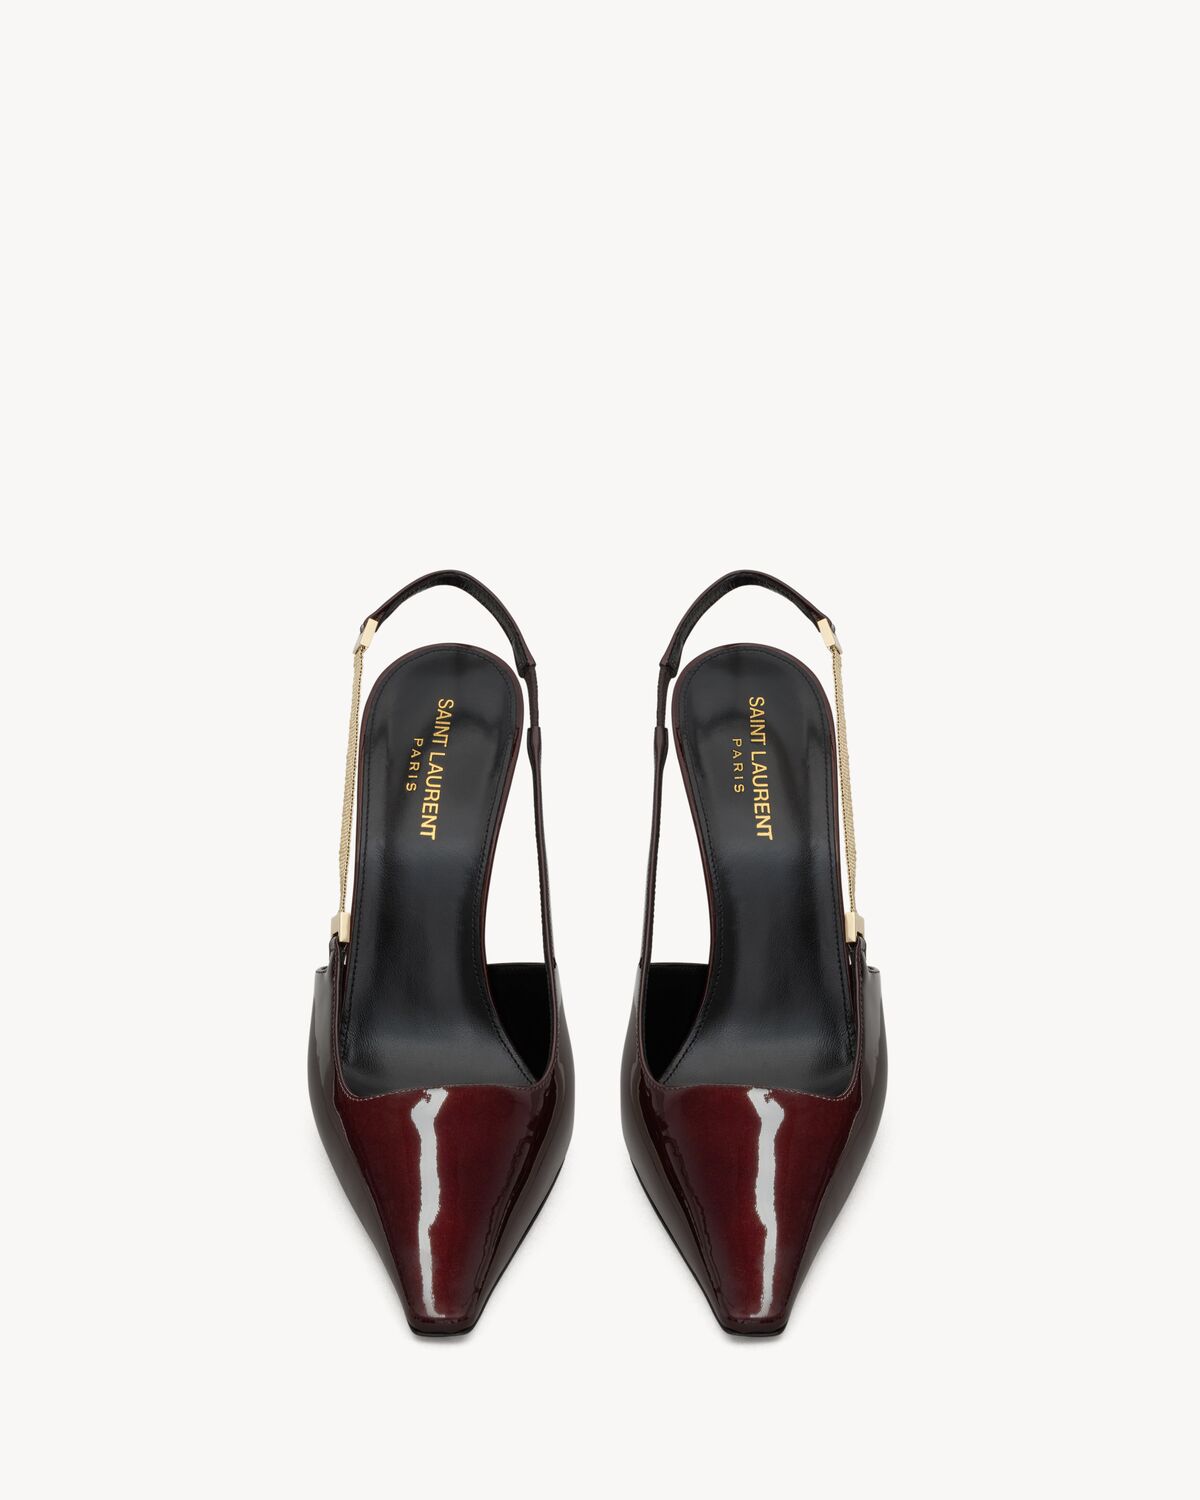 BLAKE slingback pumps in patent leather